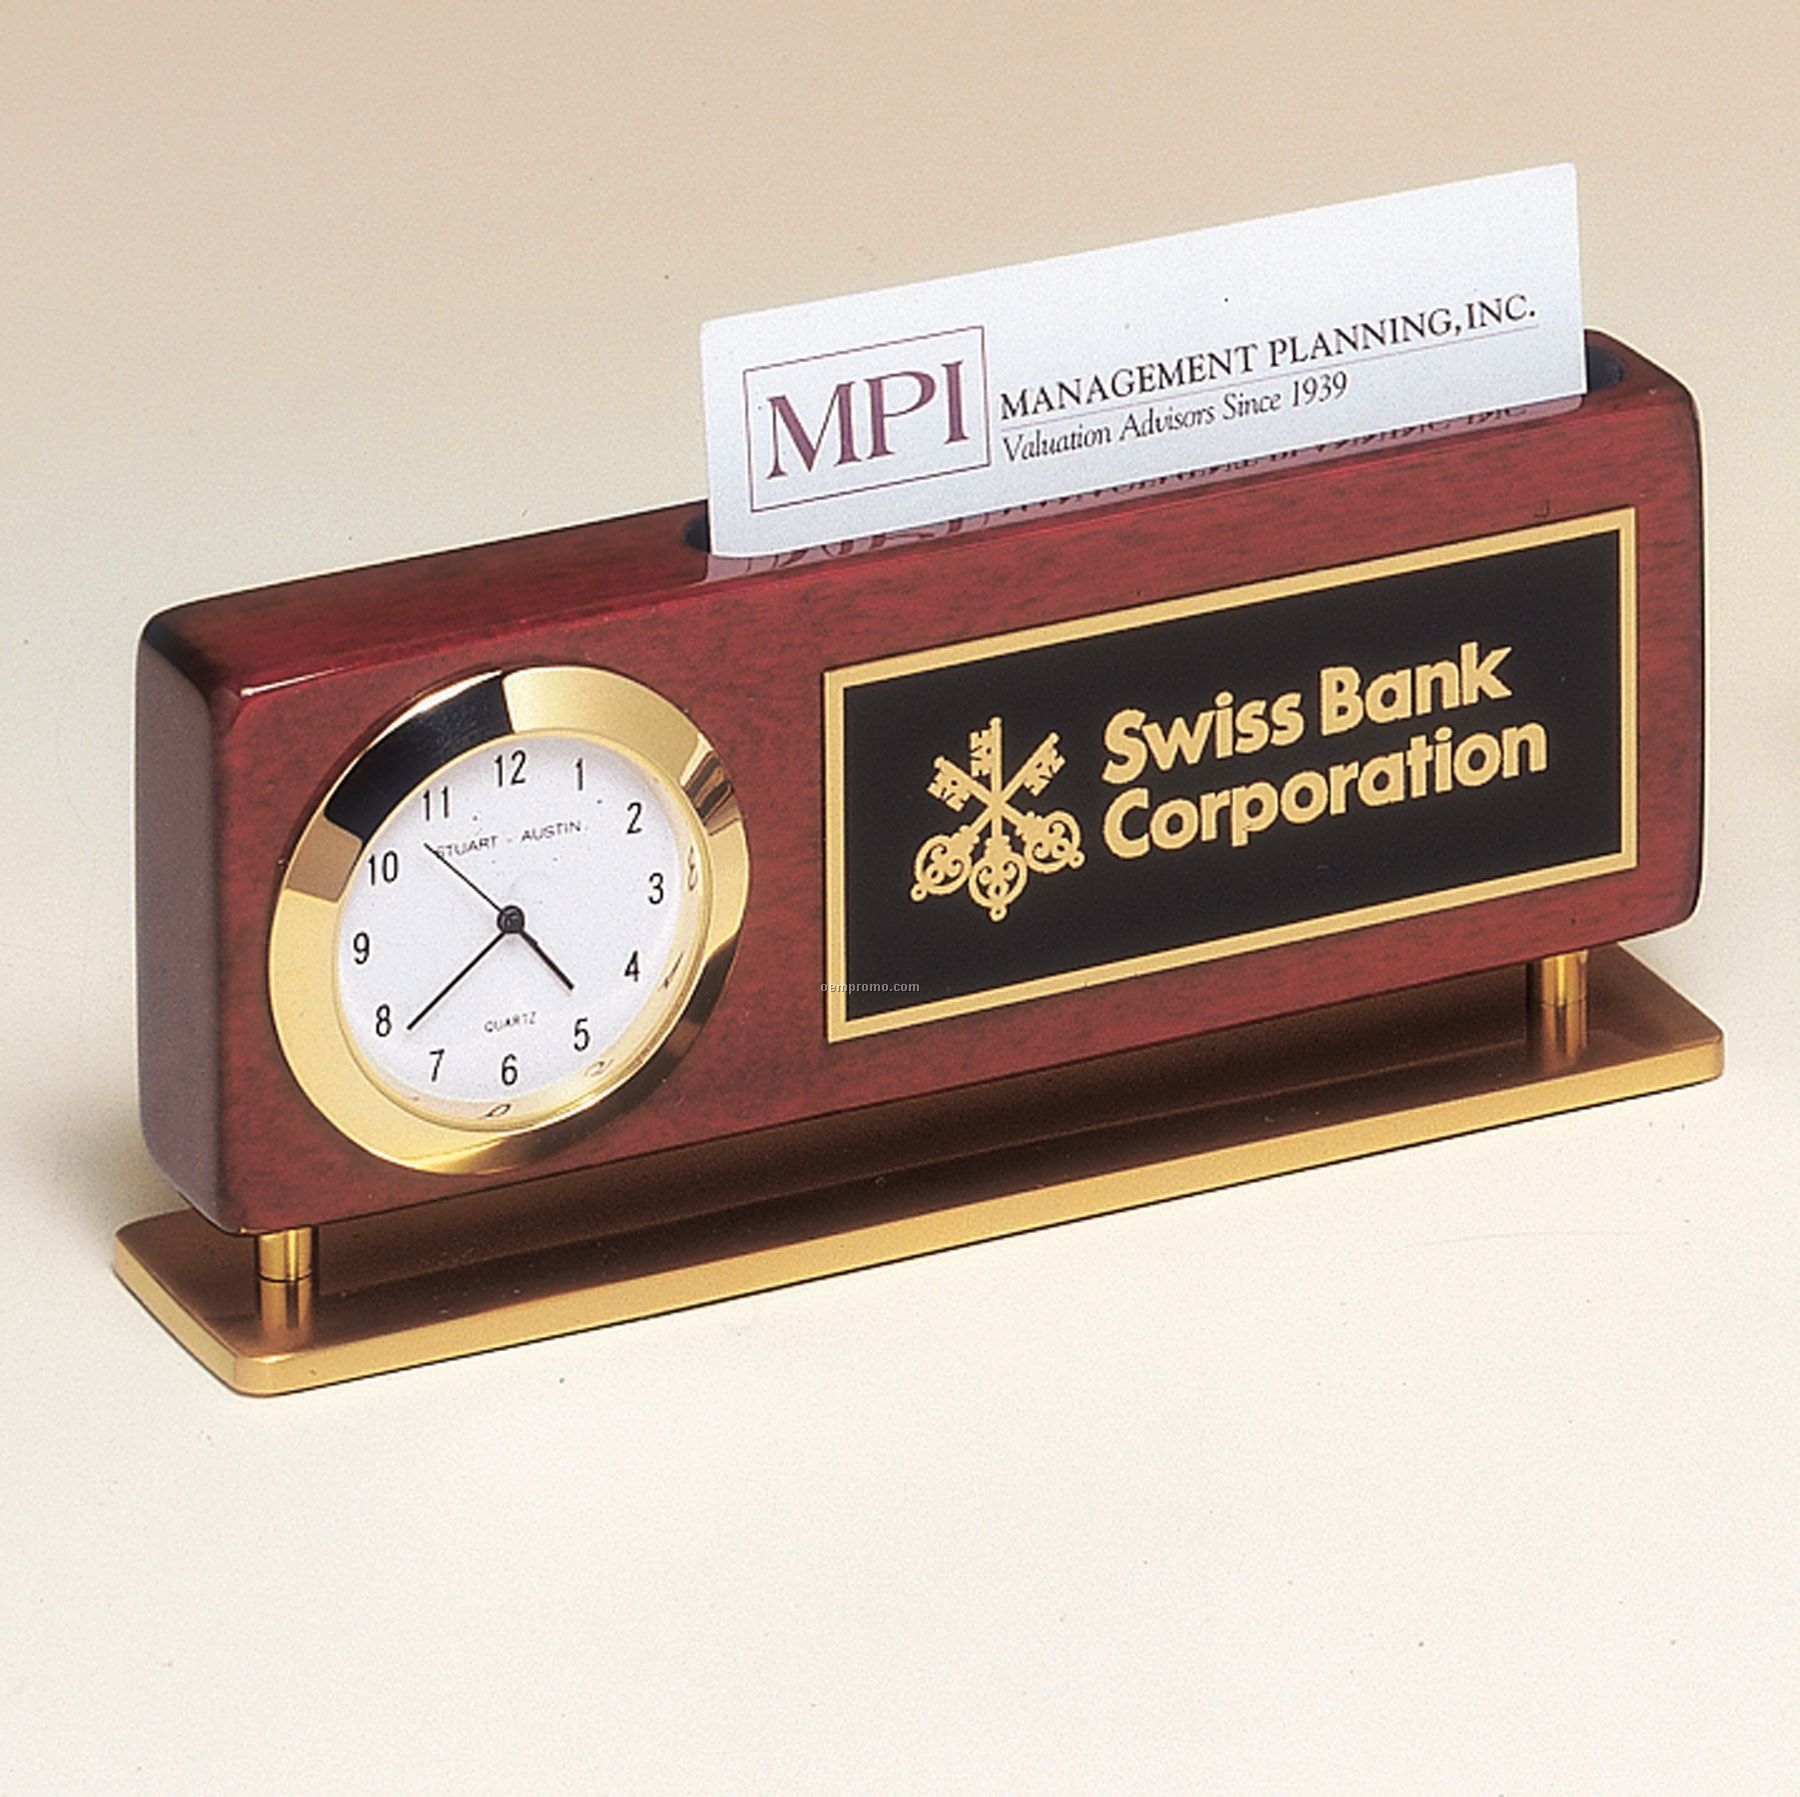 Rosewood Piano Finish Clock With Business Card Holder